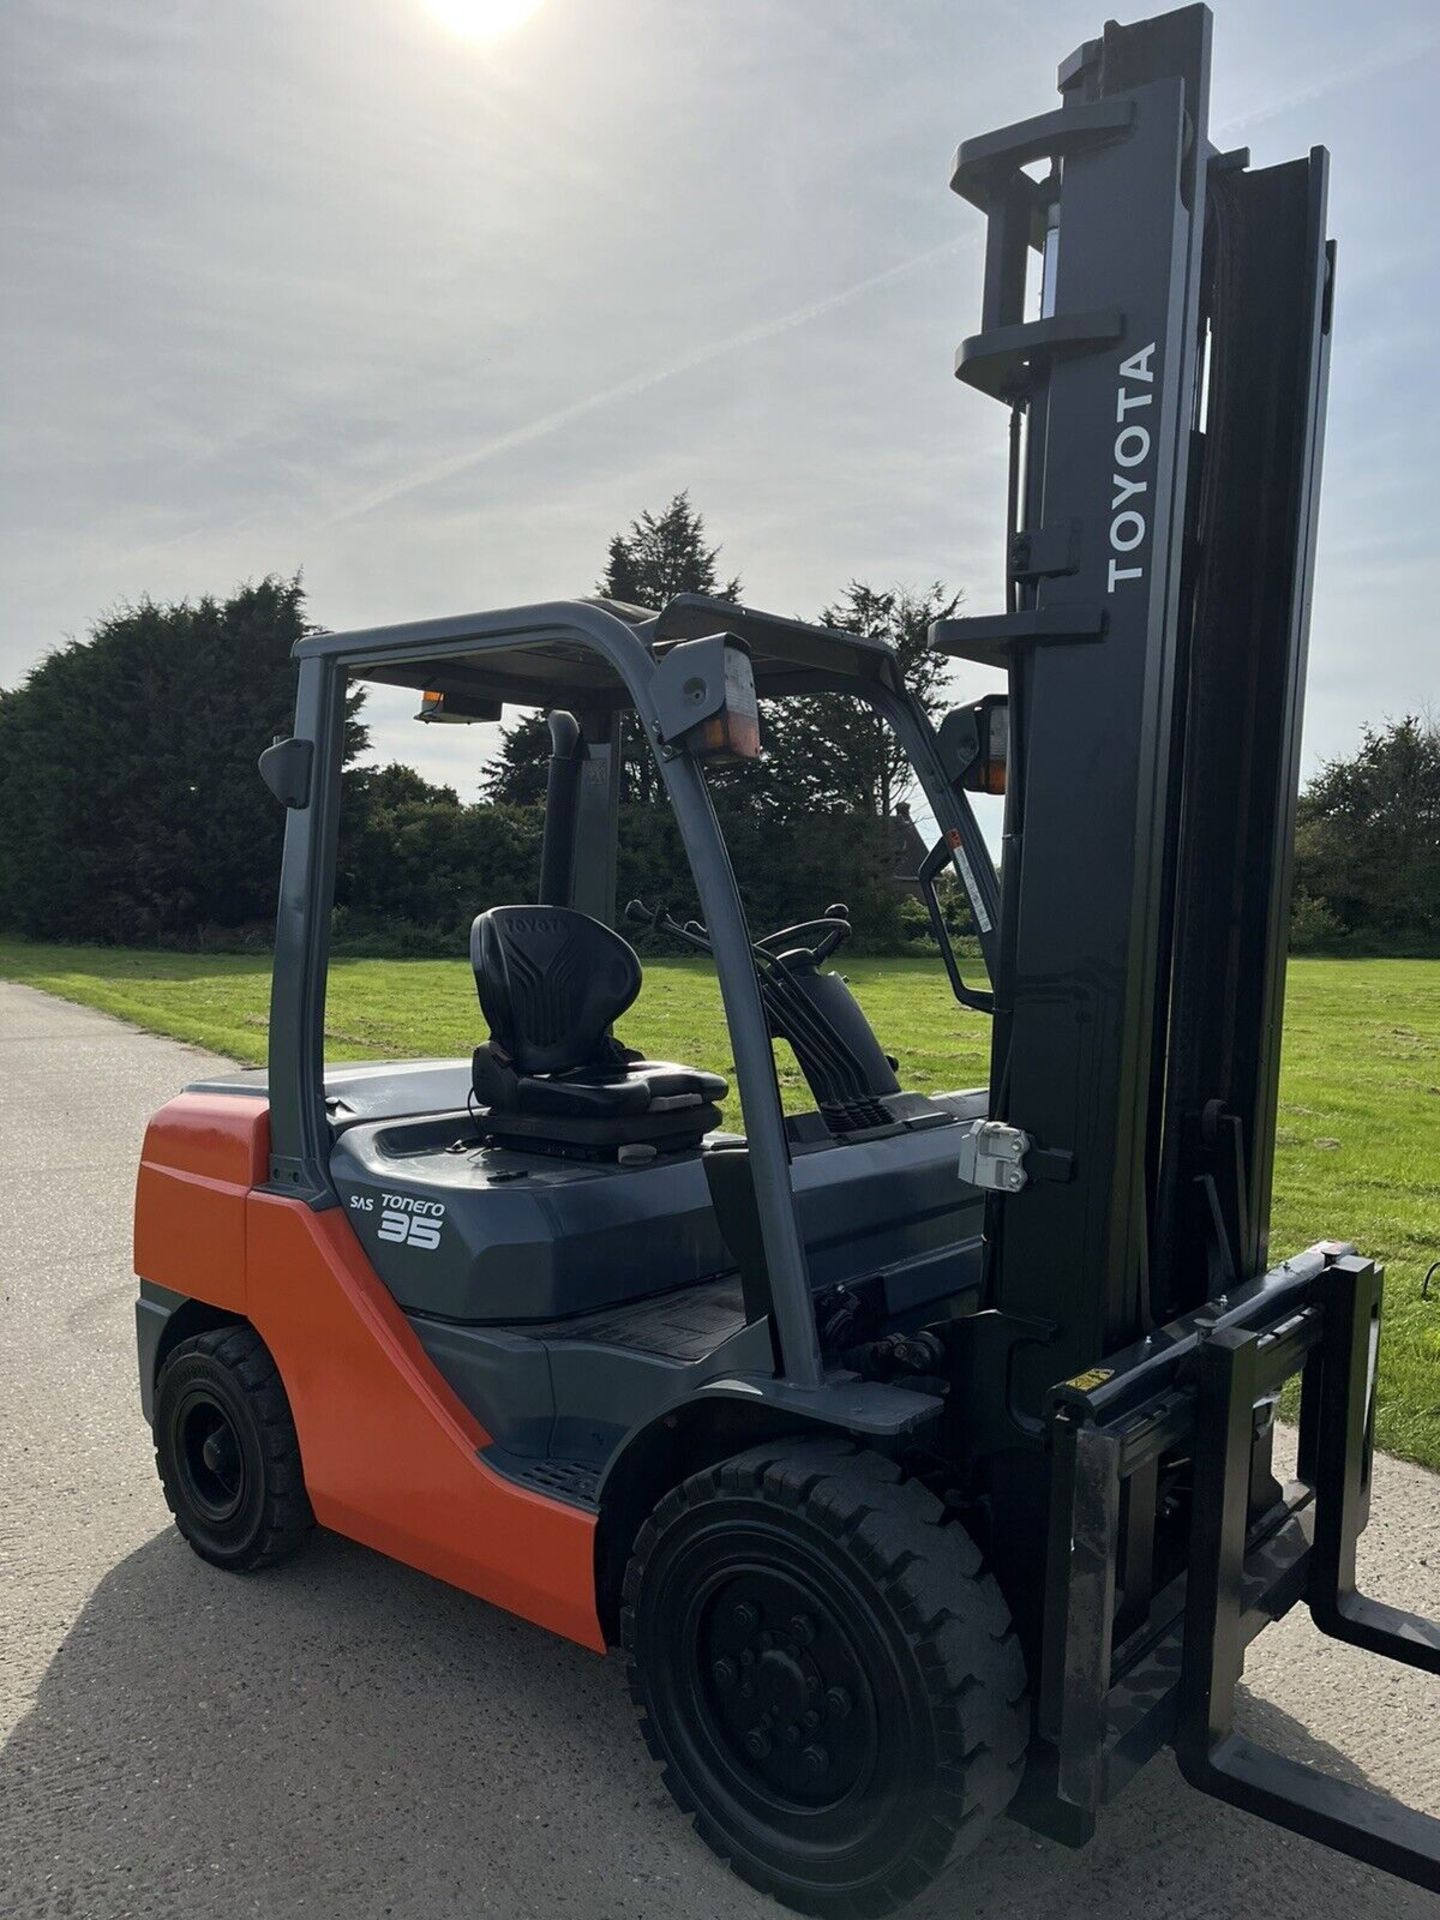 Toyota 3.5 Tonne Diesel Forklift Low Hours 2016 - Image 3 of 6